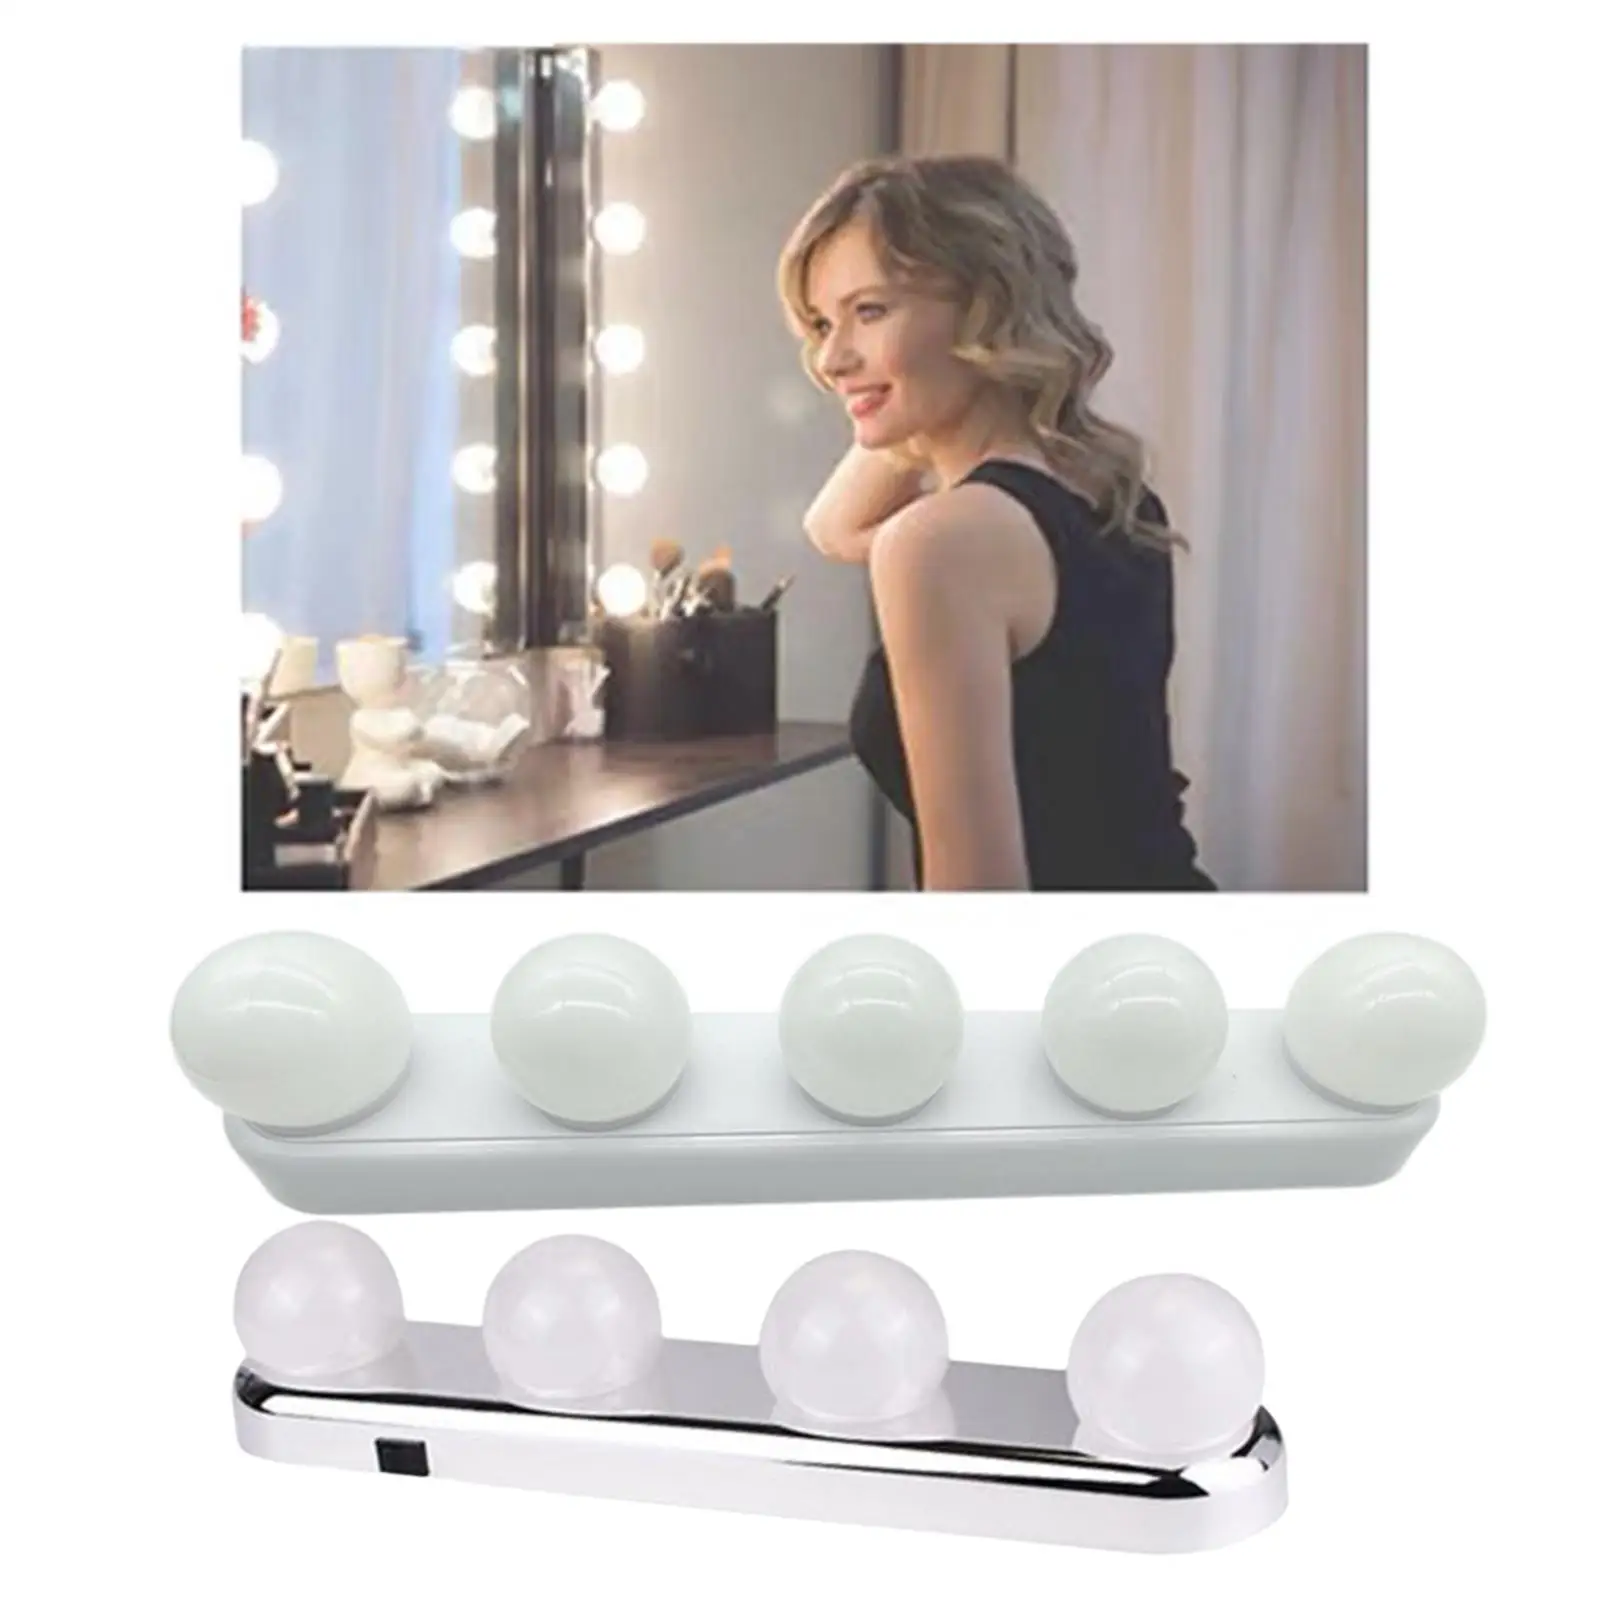 LED Makeup Mirror Light Headlight Warm White Bright Wall Lamp for Bathroom Dressing Table Beauty Mirror Fashion Show Cabinet